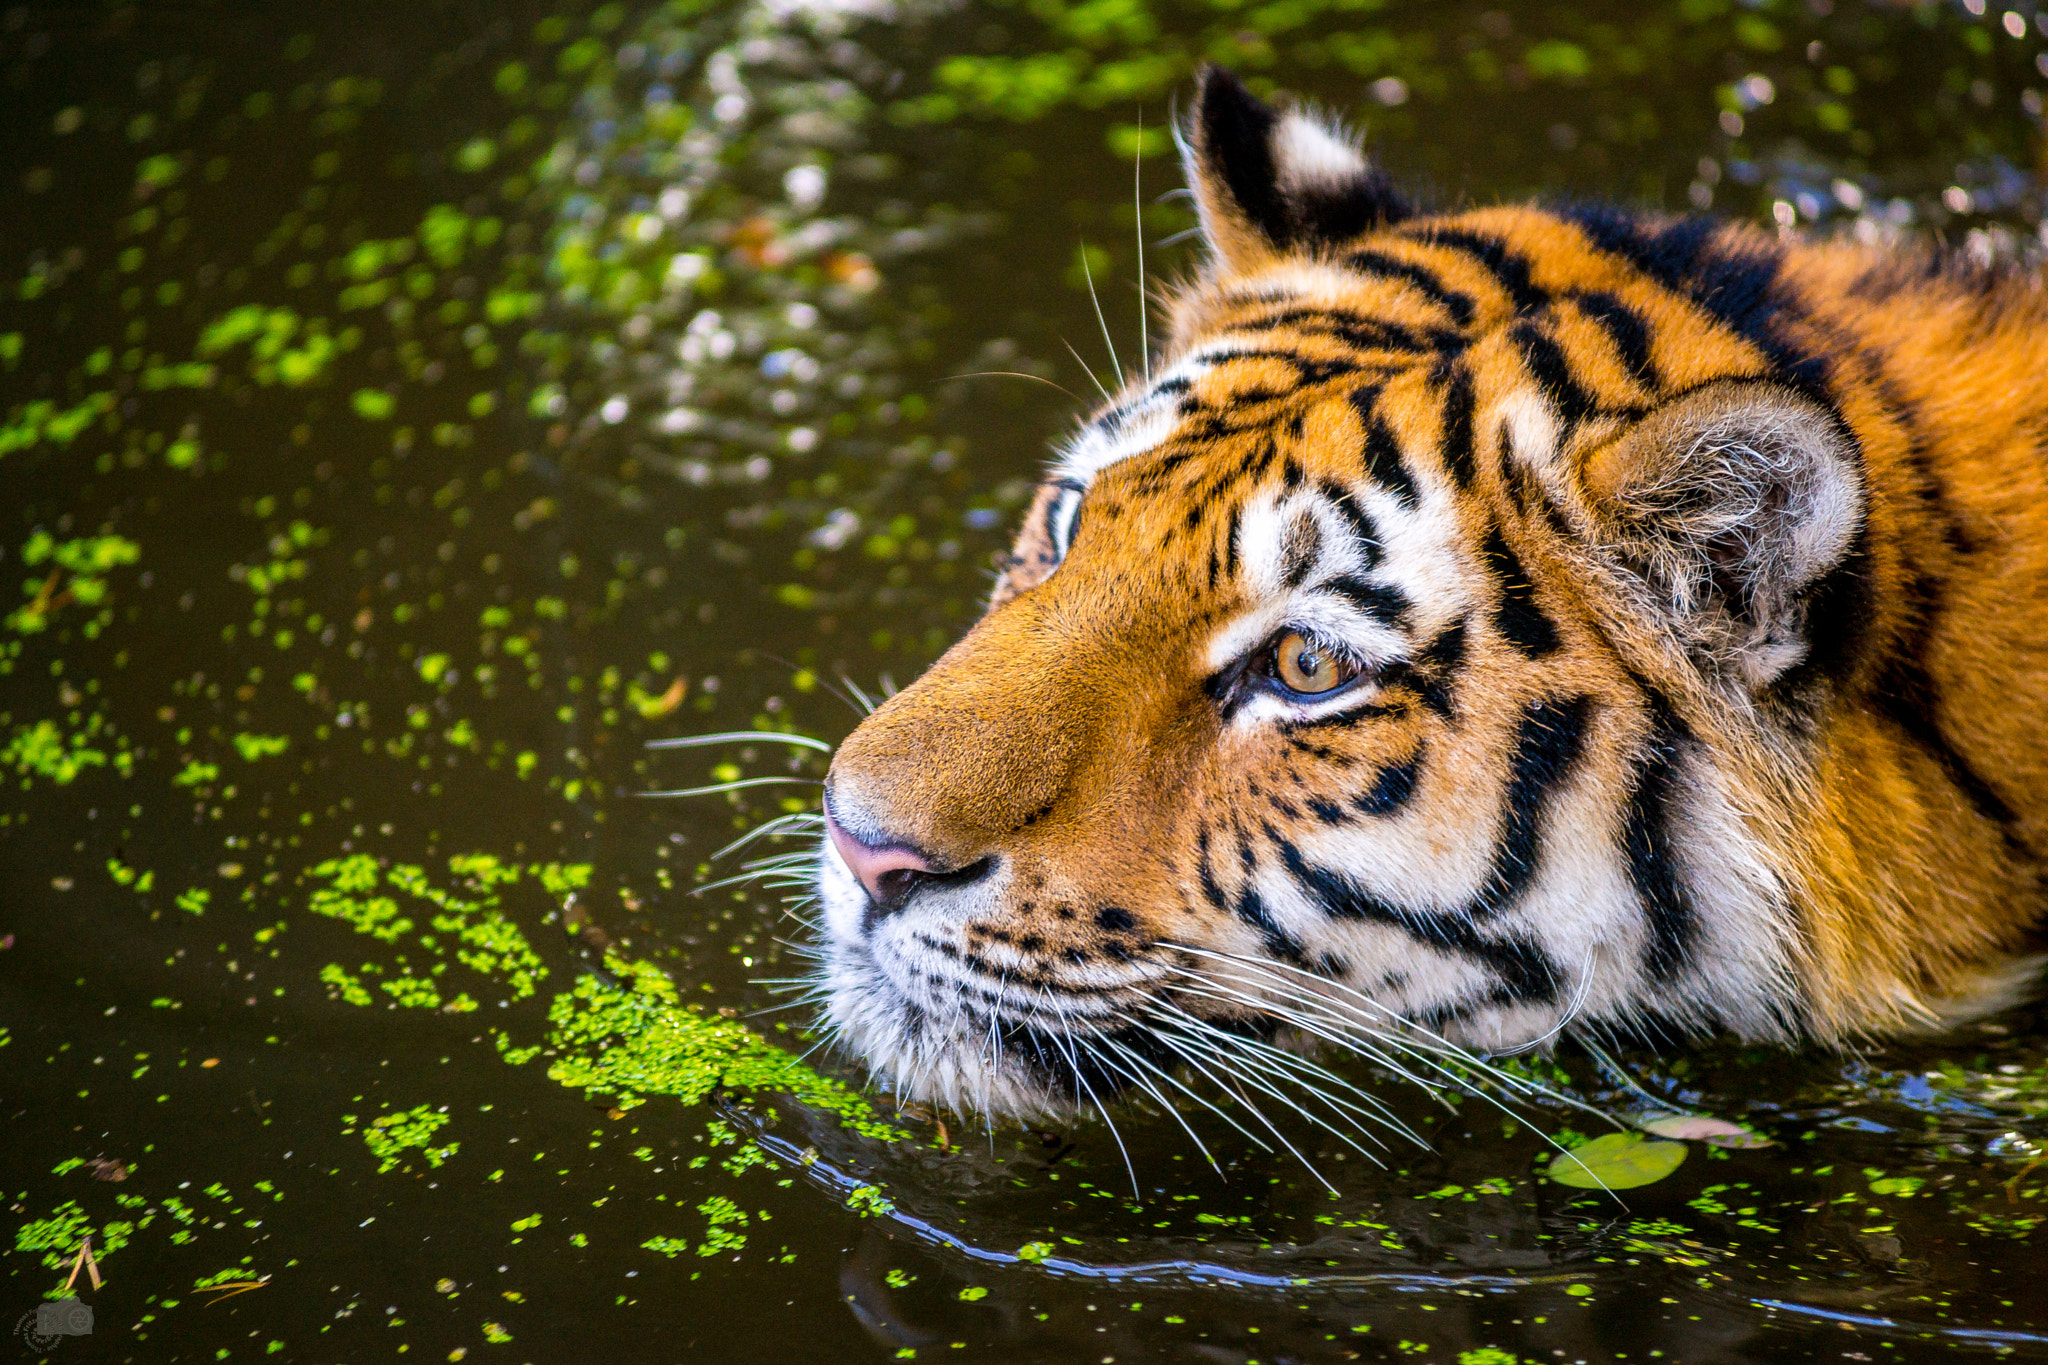 Sony a99 II sample photo. Eye of the tiger photography